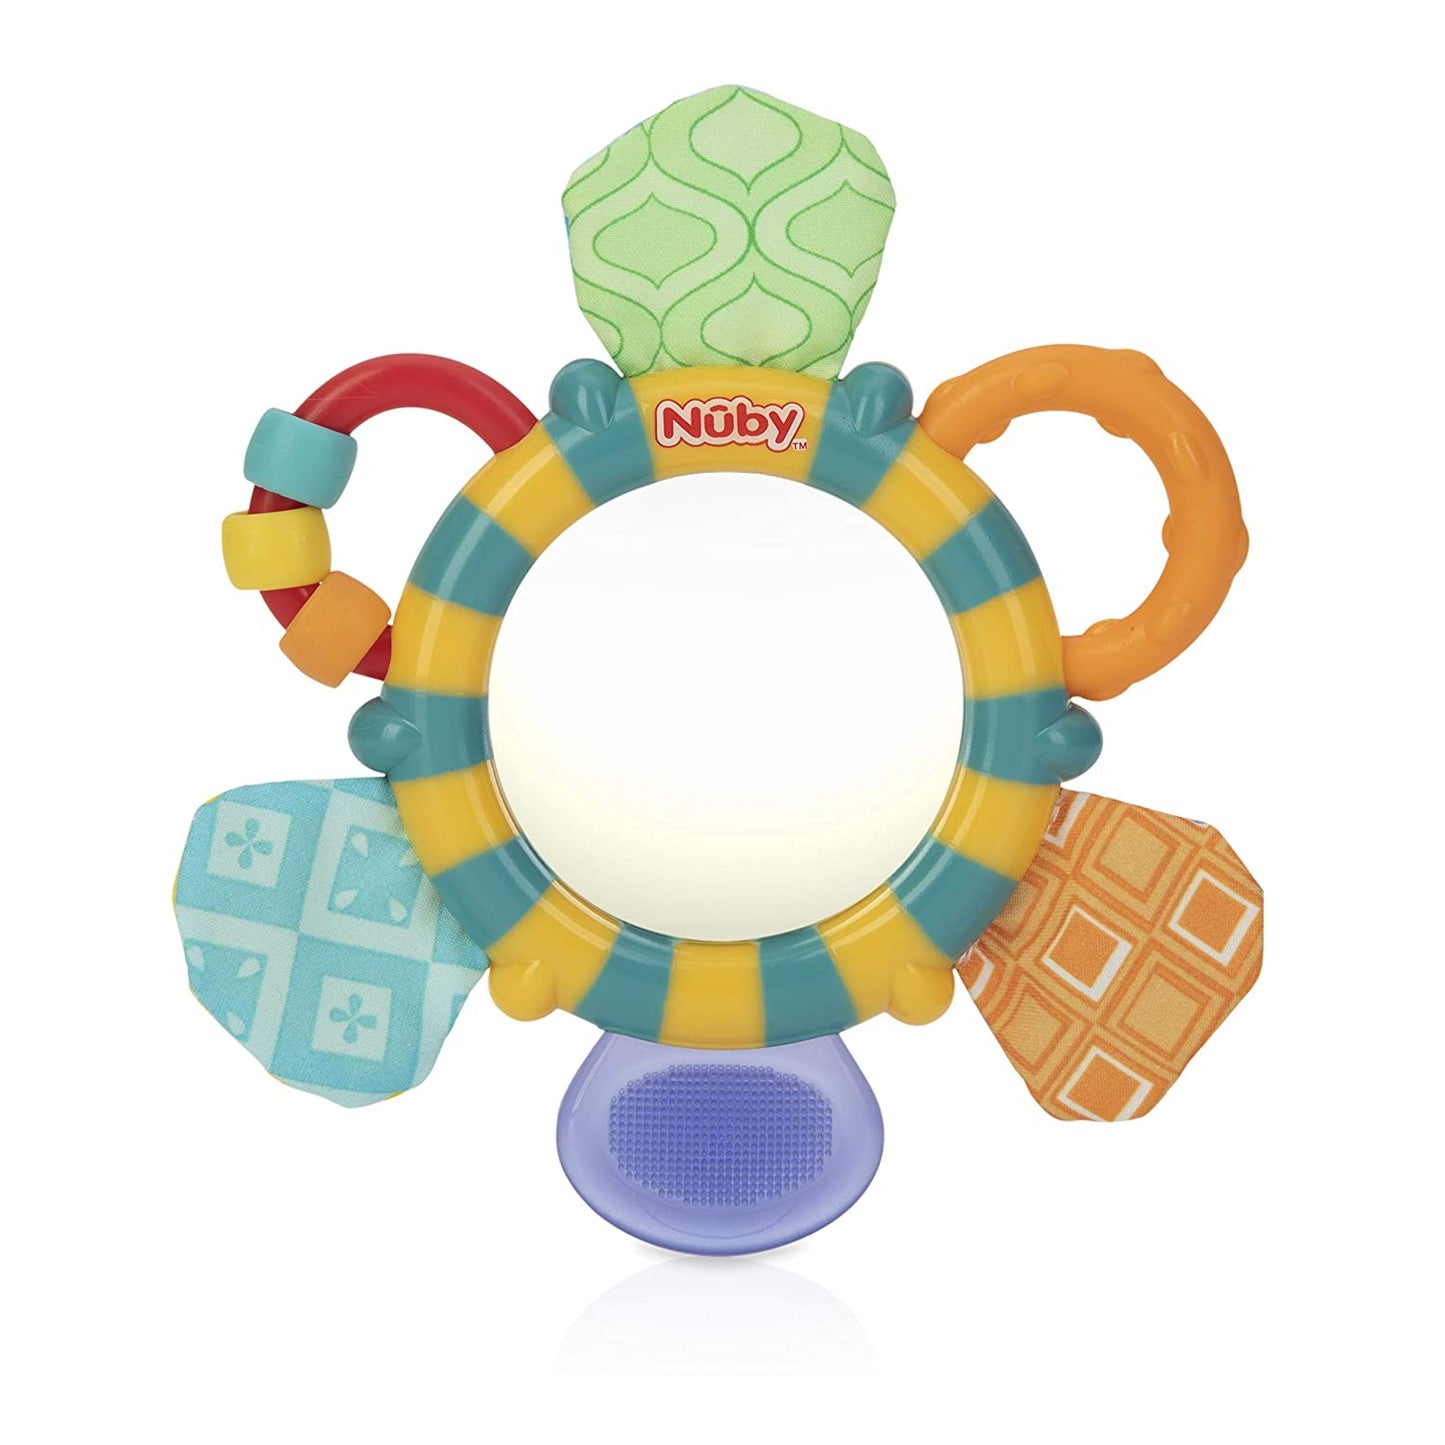 Nuby Look-at-Me Mirror Teether Toy, Colors May Vary (Blue/Yellow)